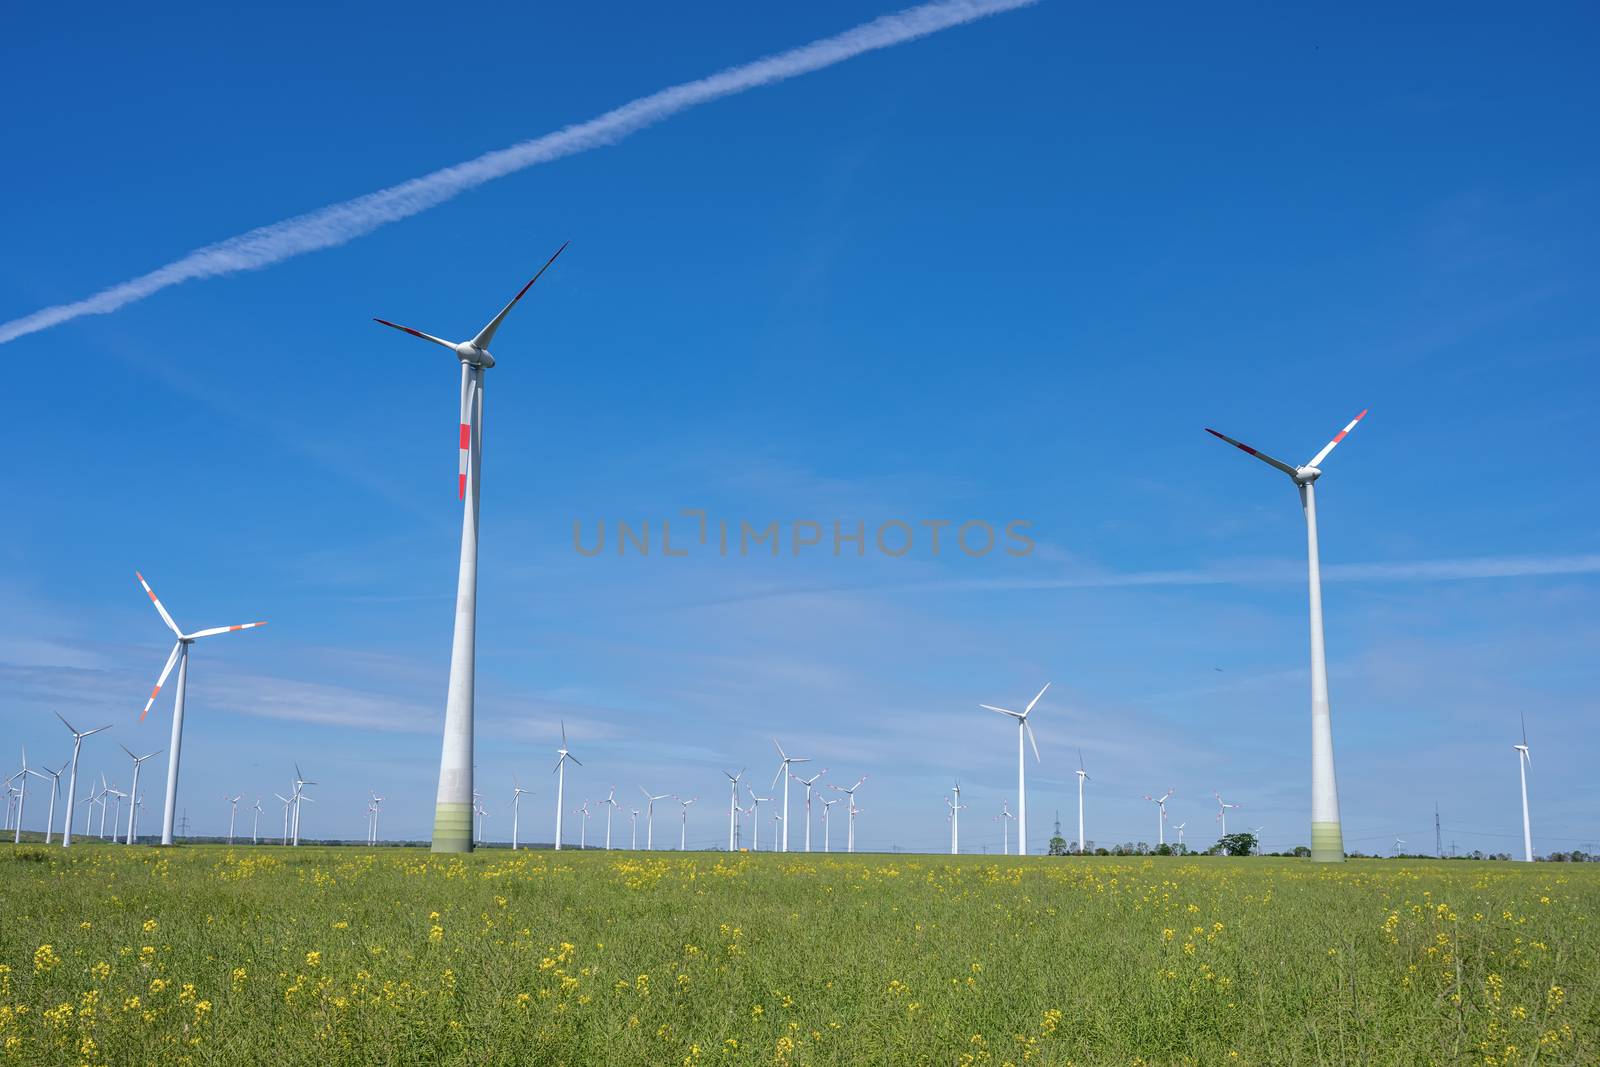 Wind energy generators in an agricultural field seen in Germany